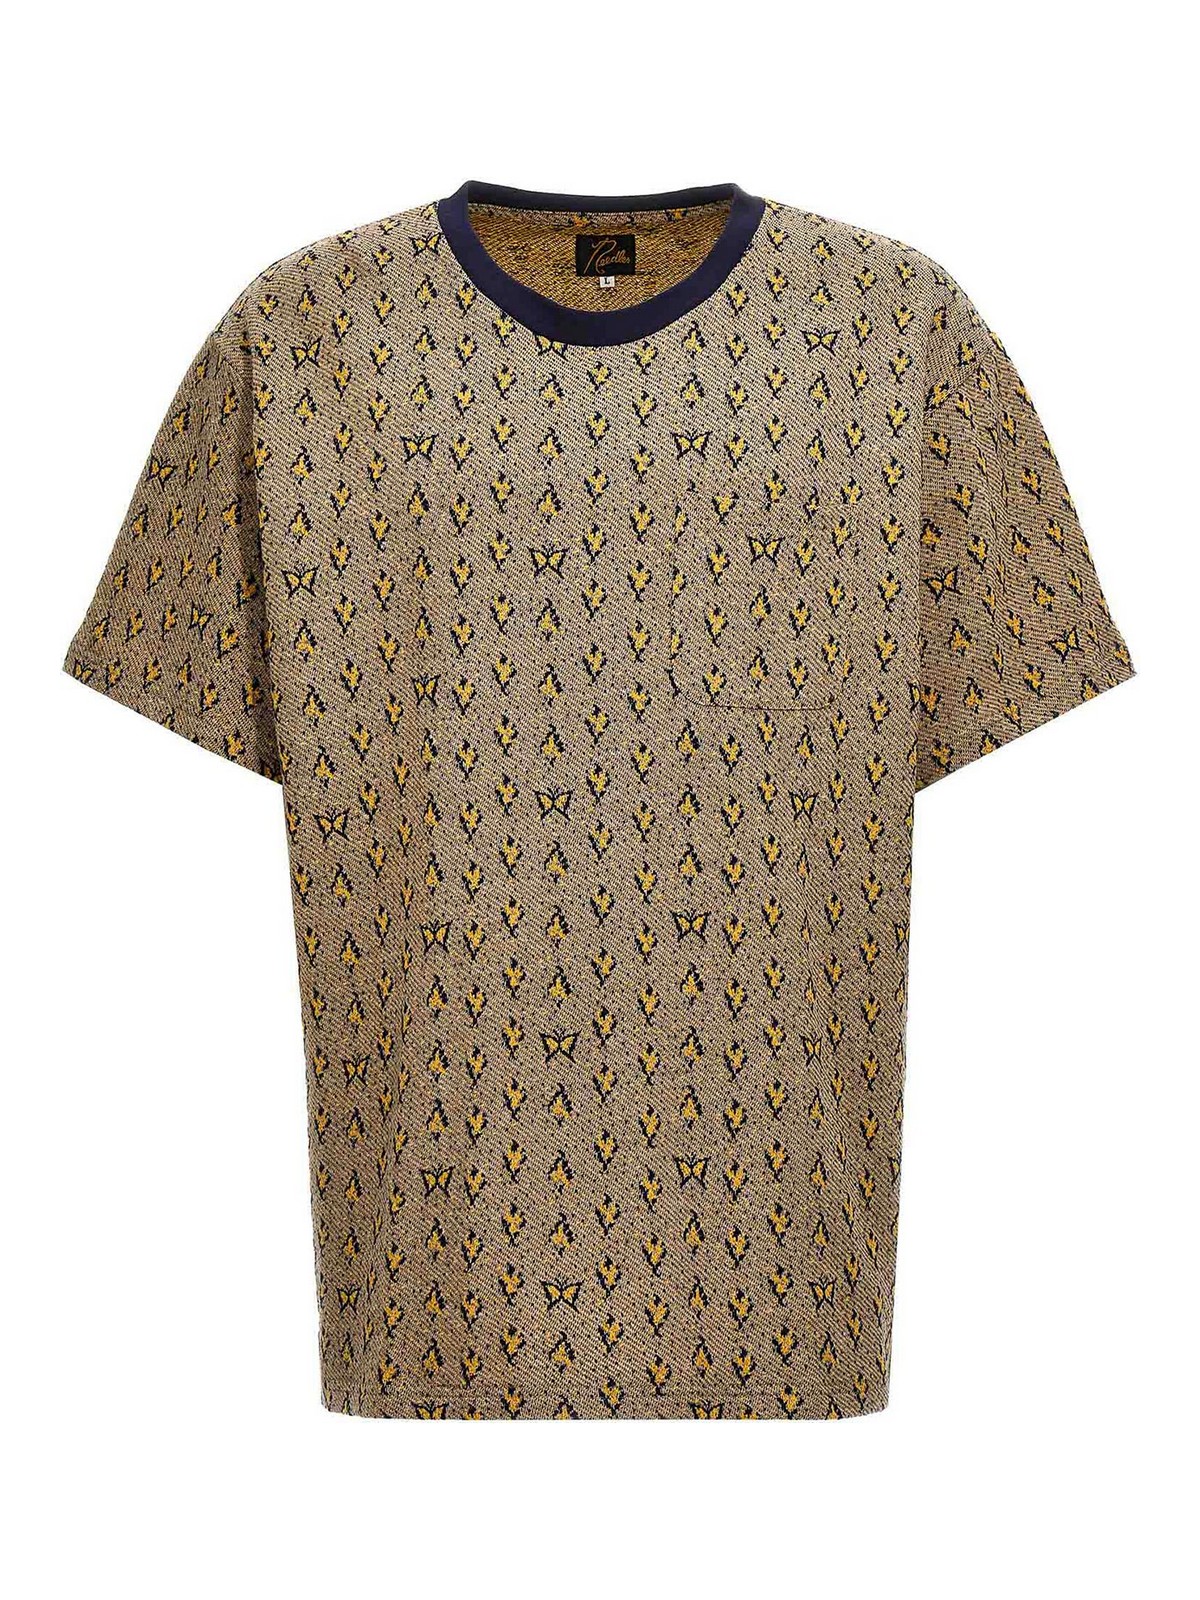 Needles Jacquard Patterned T-shirt In Multicolour